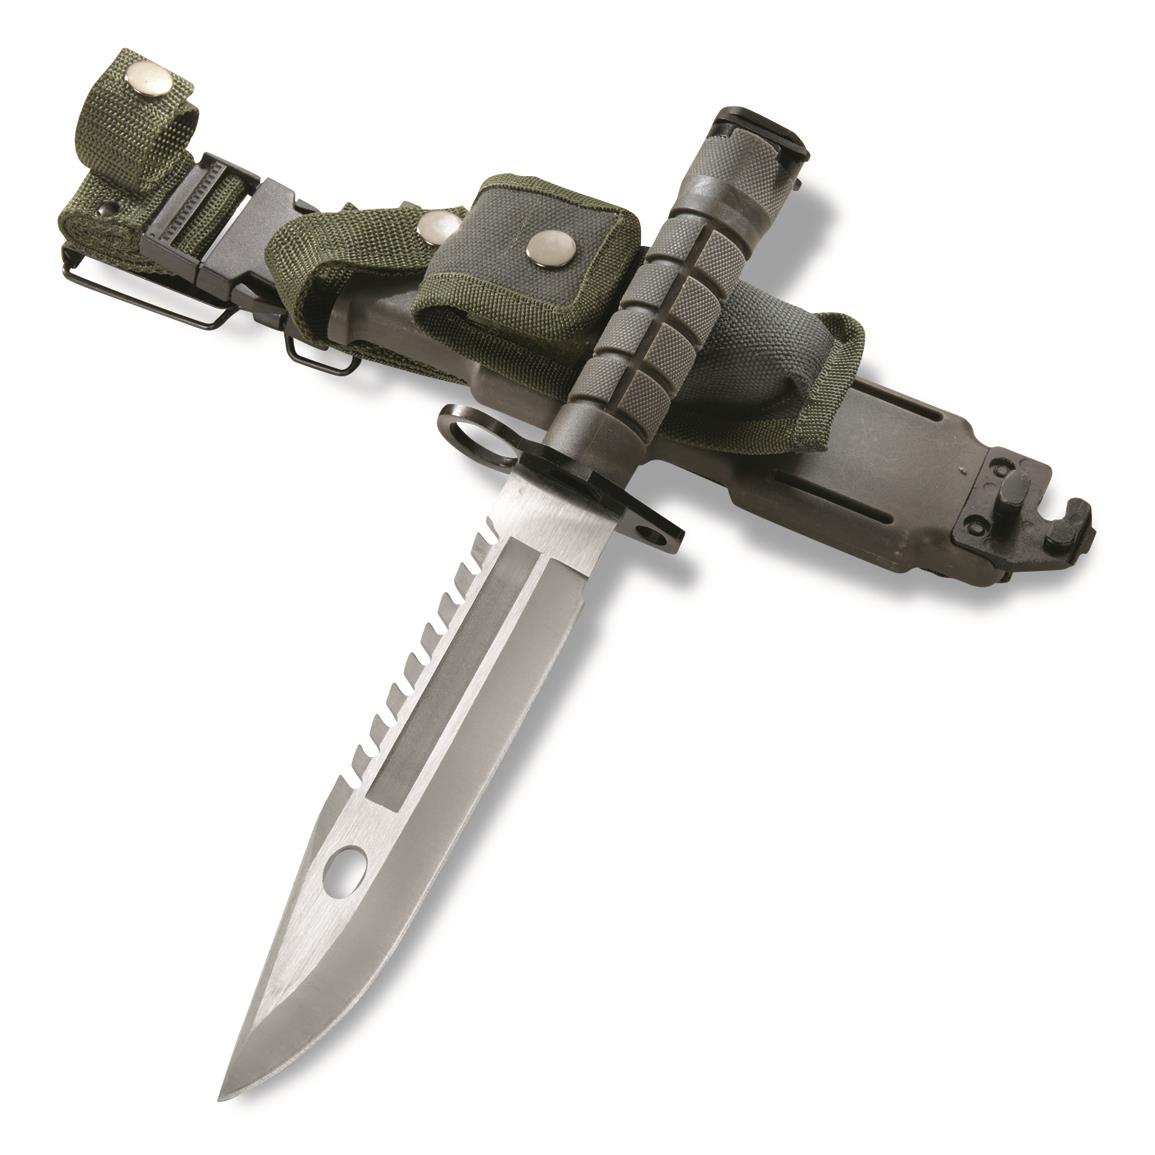 Military Style 12.75" Bayonet Knife with Sheath - 724304, Military Bayonets (Post 1945) at Sportsman's Guide